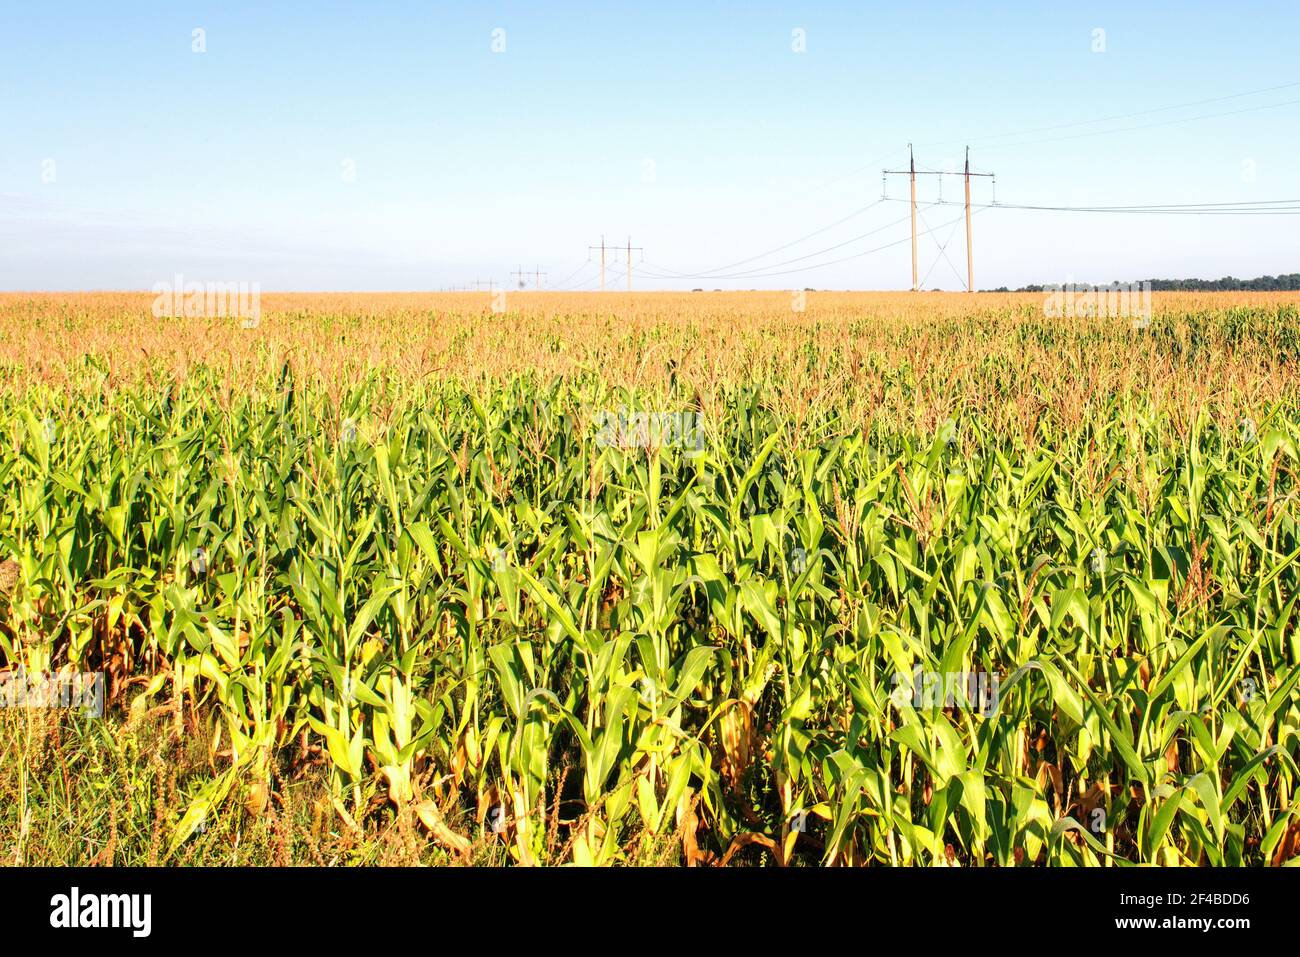 Close-up of silage corn leaf tops against blue sky. A power line is laid across the field. Stock Photo